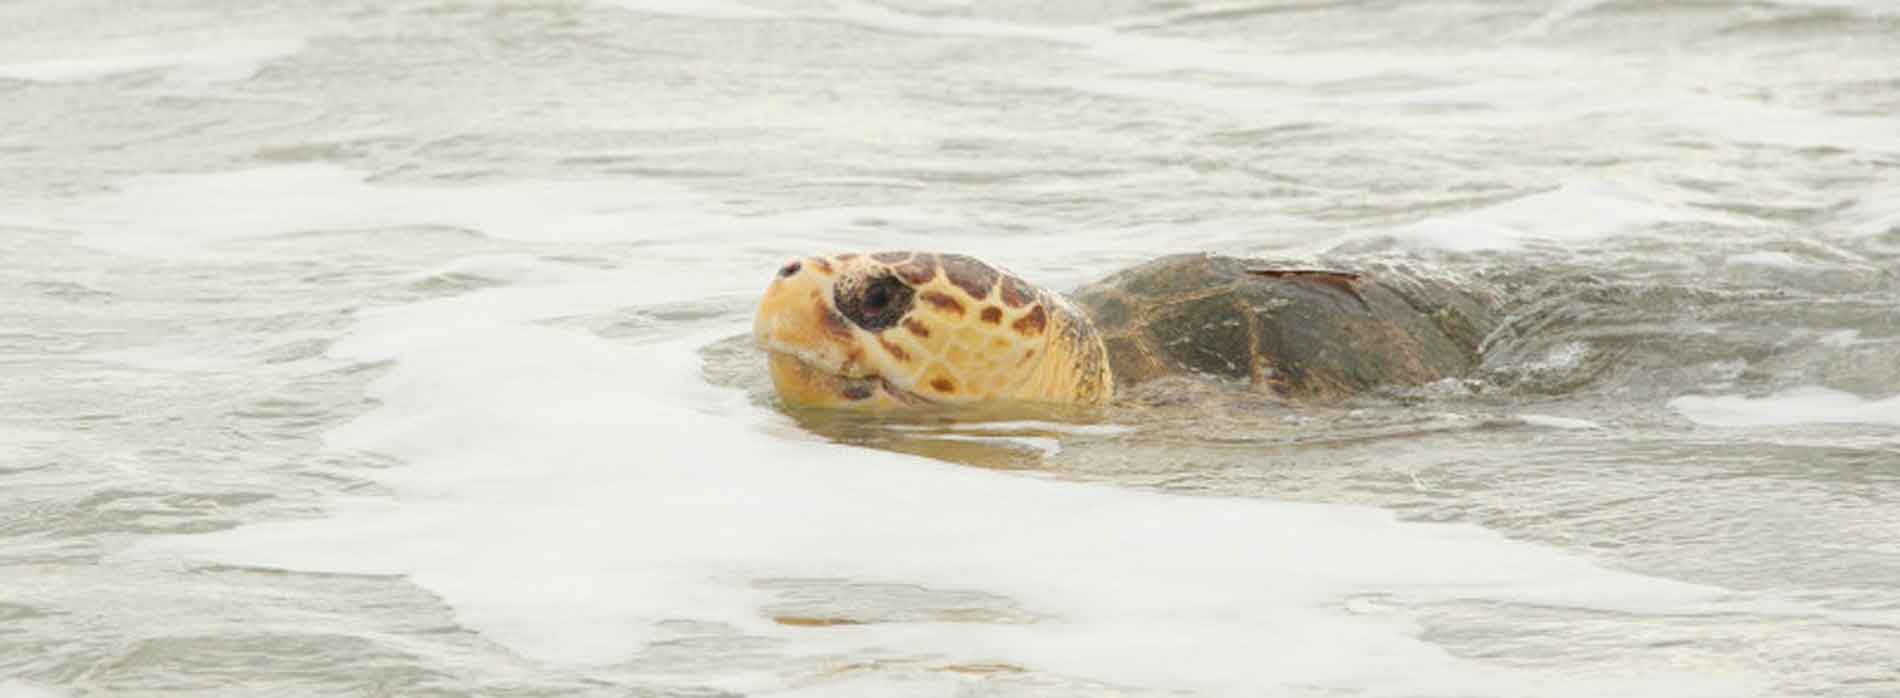 Sea turtle in shallow water